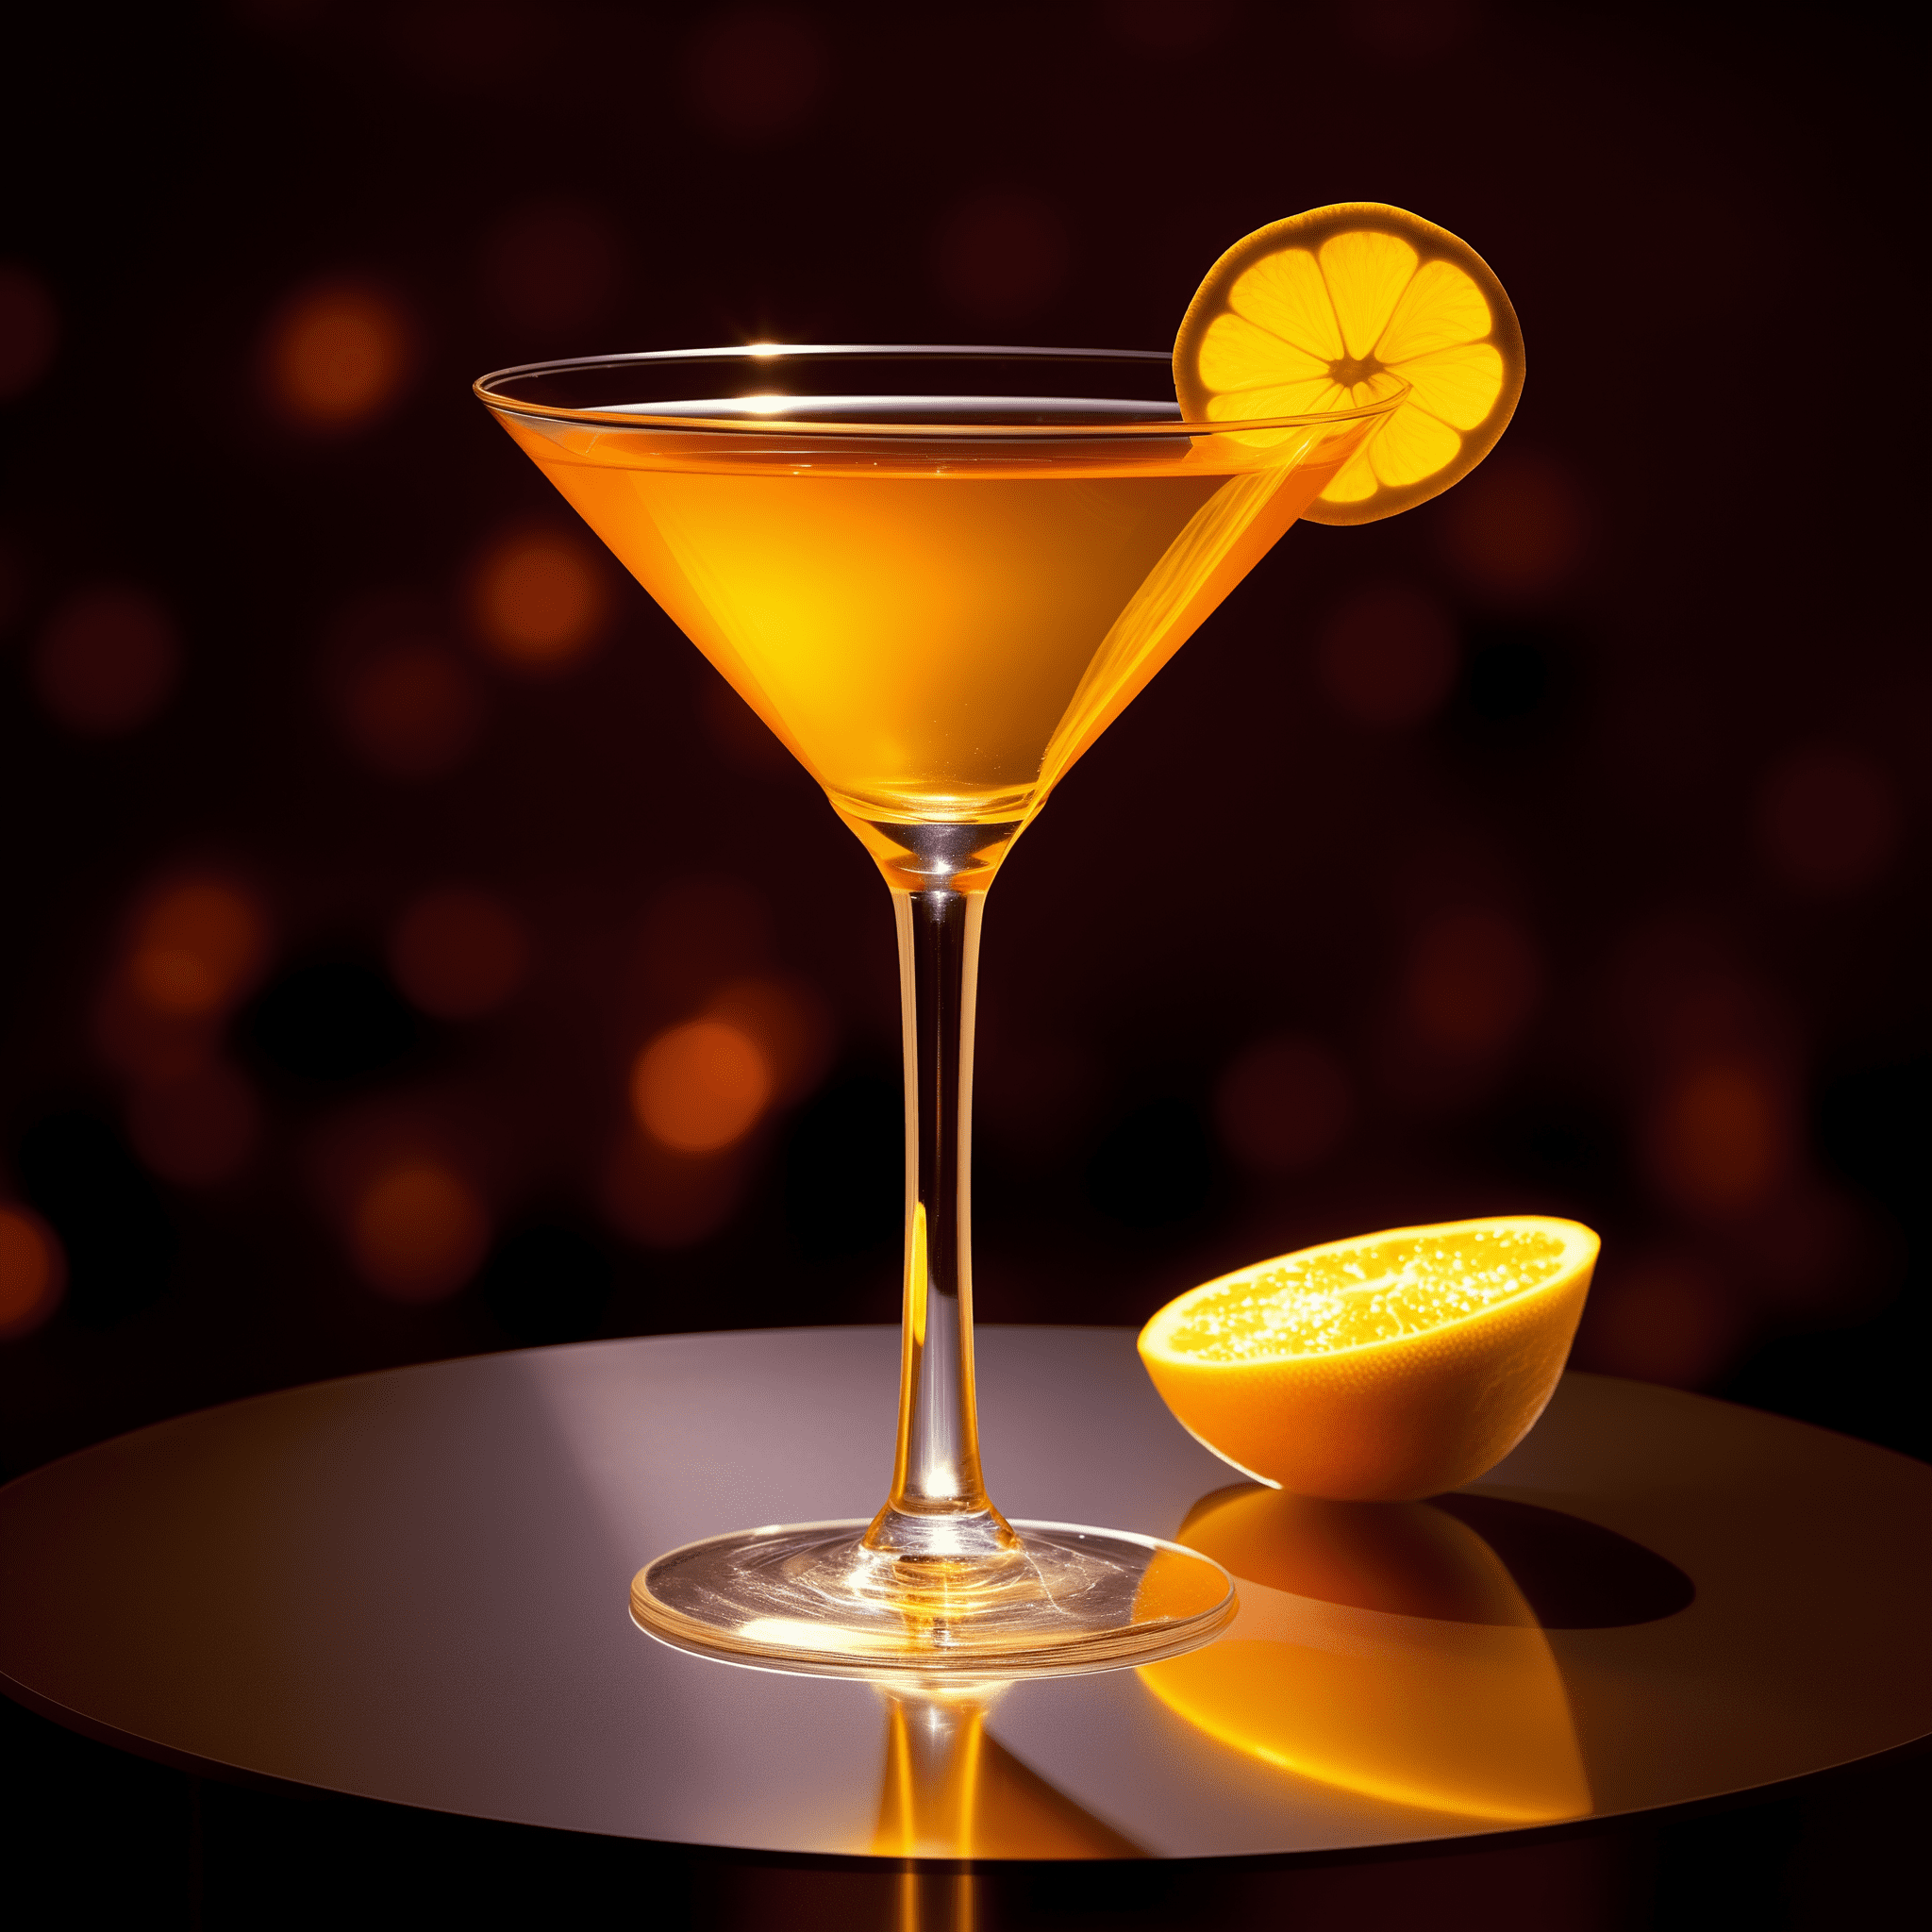 Peppertini Cocktail Recipe - The Peppertini has a bold, spicy taste with a crisp, dry finish. The pepper vodka provides a warming sensation, while the dry vermouth balances it with a subtle herbal complexity.